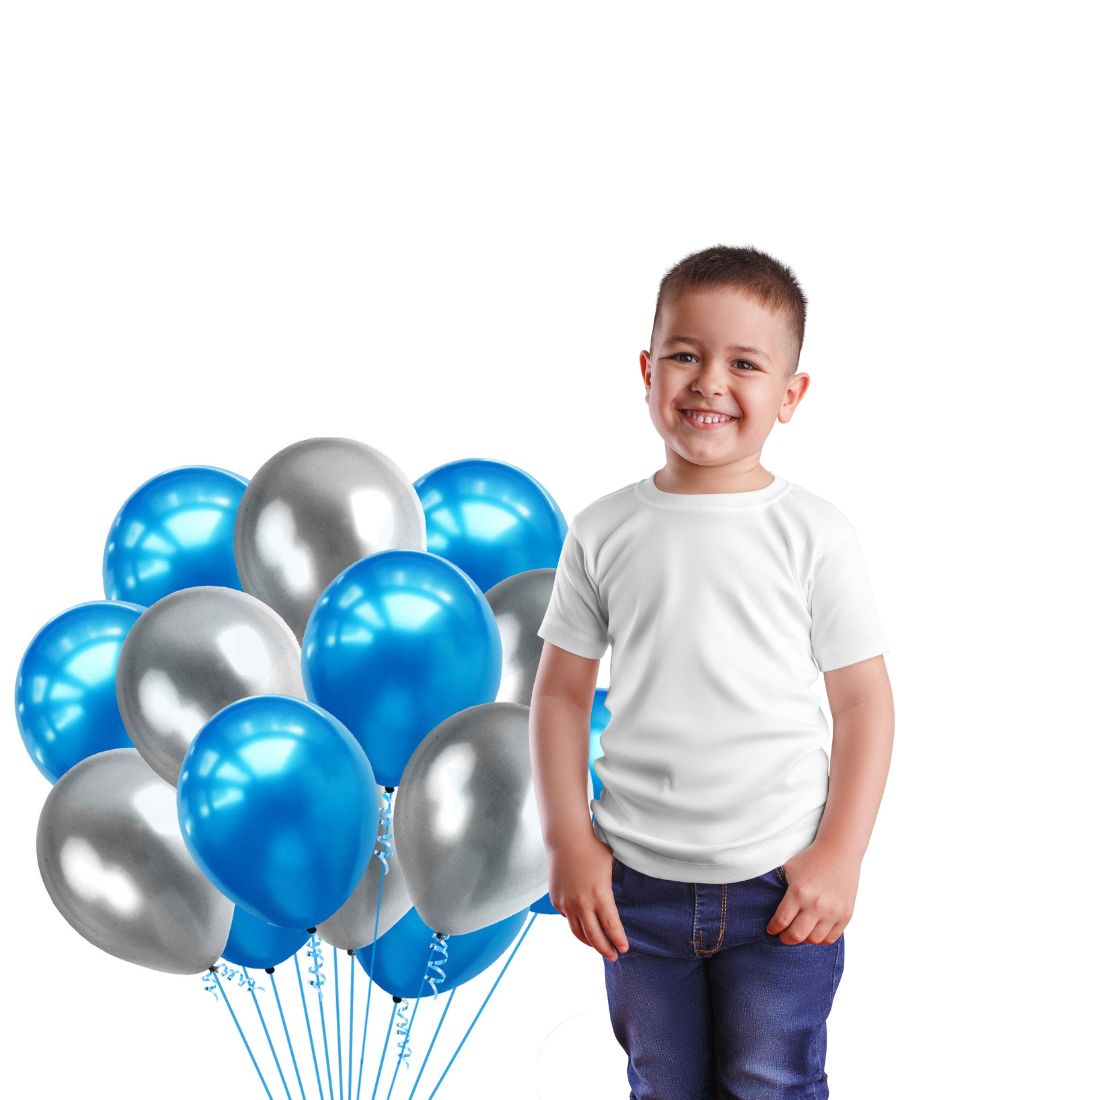 100 Blue And Silver Assorted Metallic Balloons For Baby-Bridal Shower, Birthday And Wedding Party Decoration